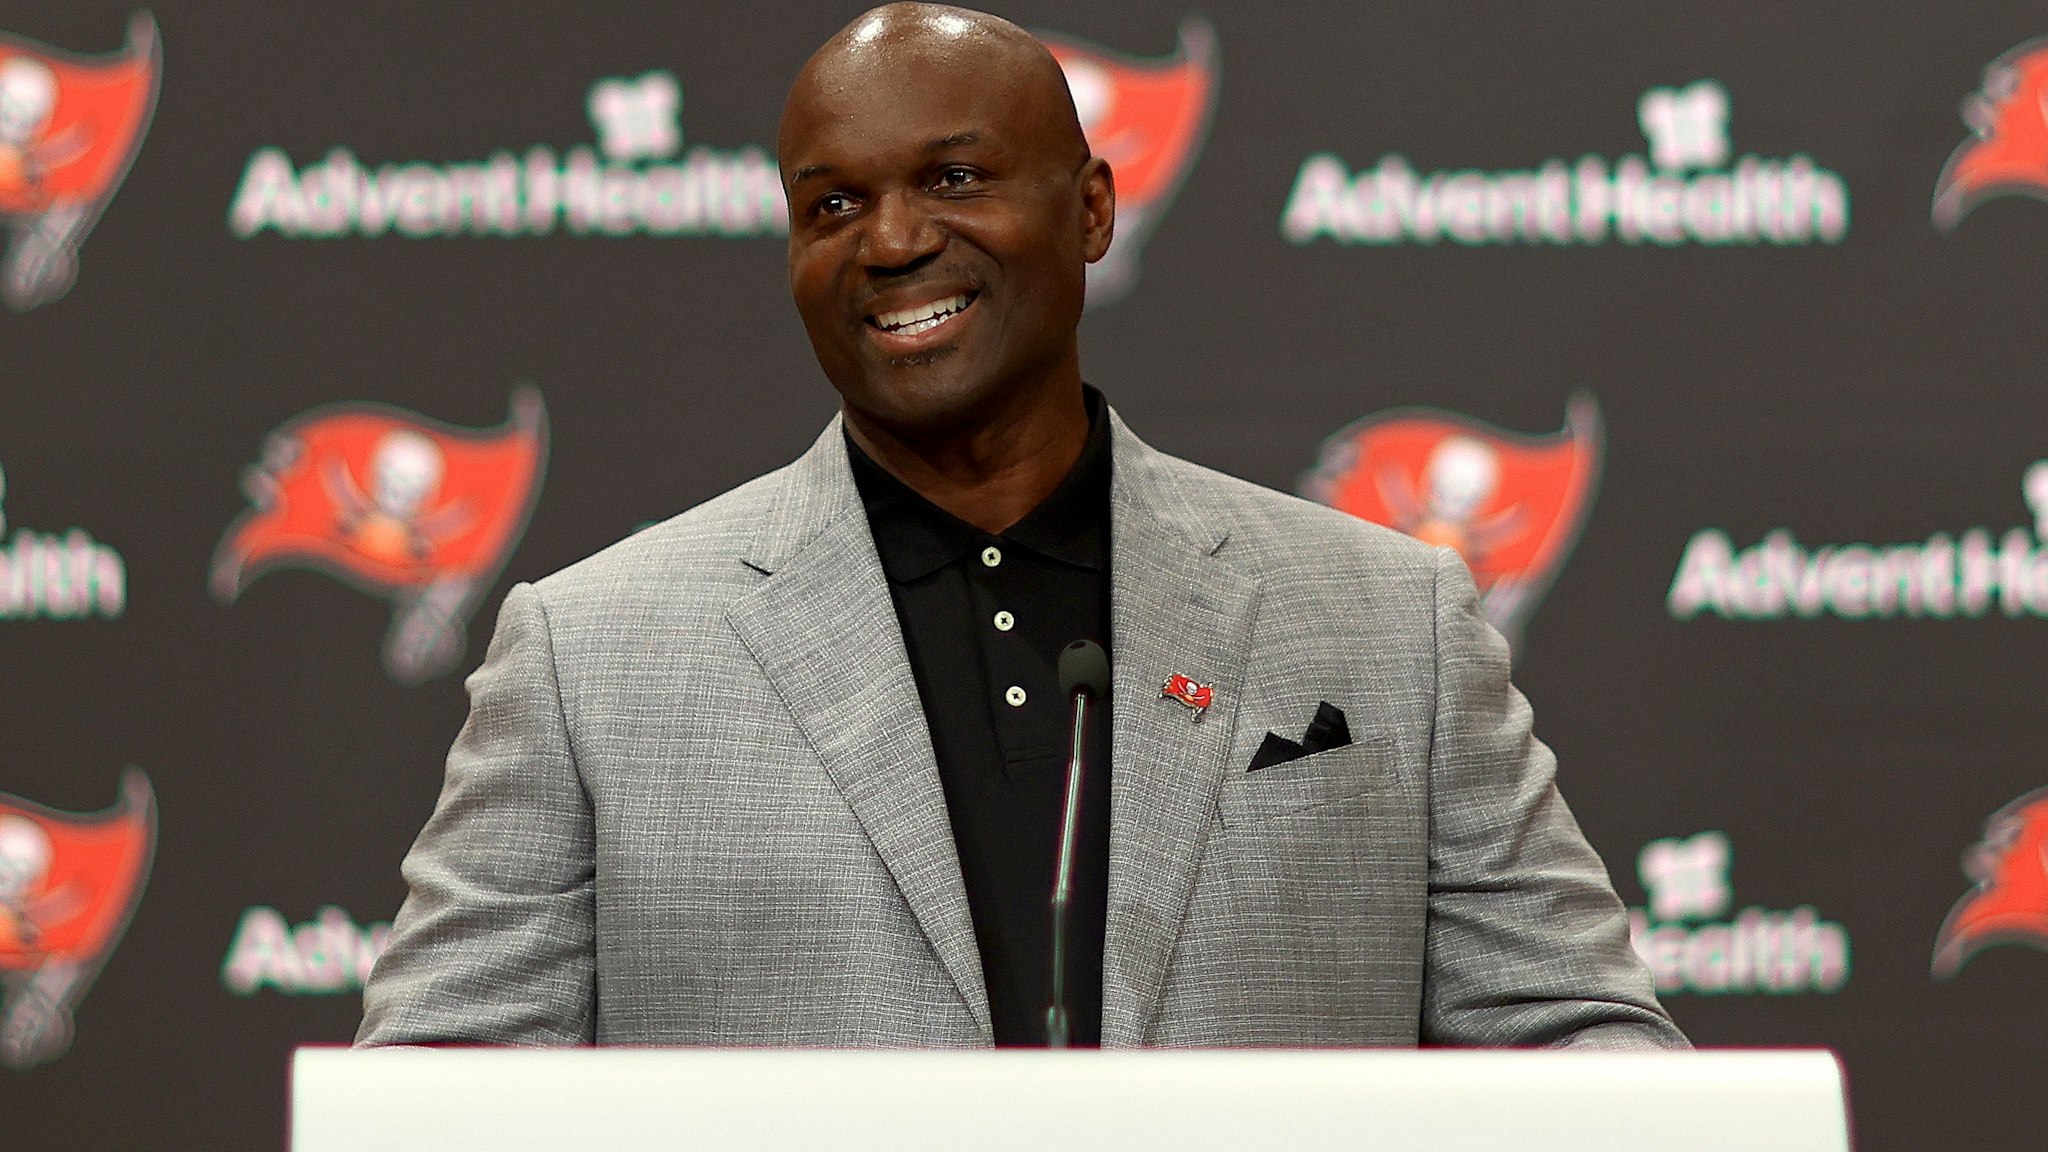 New Tampa Bay Buccaneers head coach Todd Bowles speaks with members of the media during a press conference at AdventHealth Training Center on March 31, 2022 in Tampa, Florida.